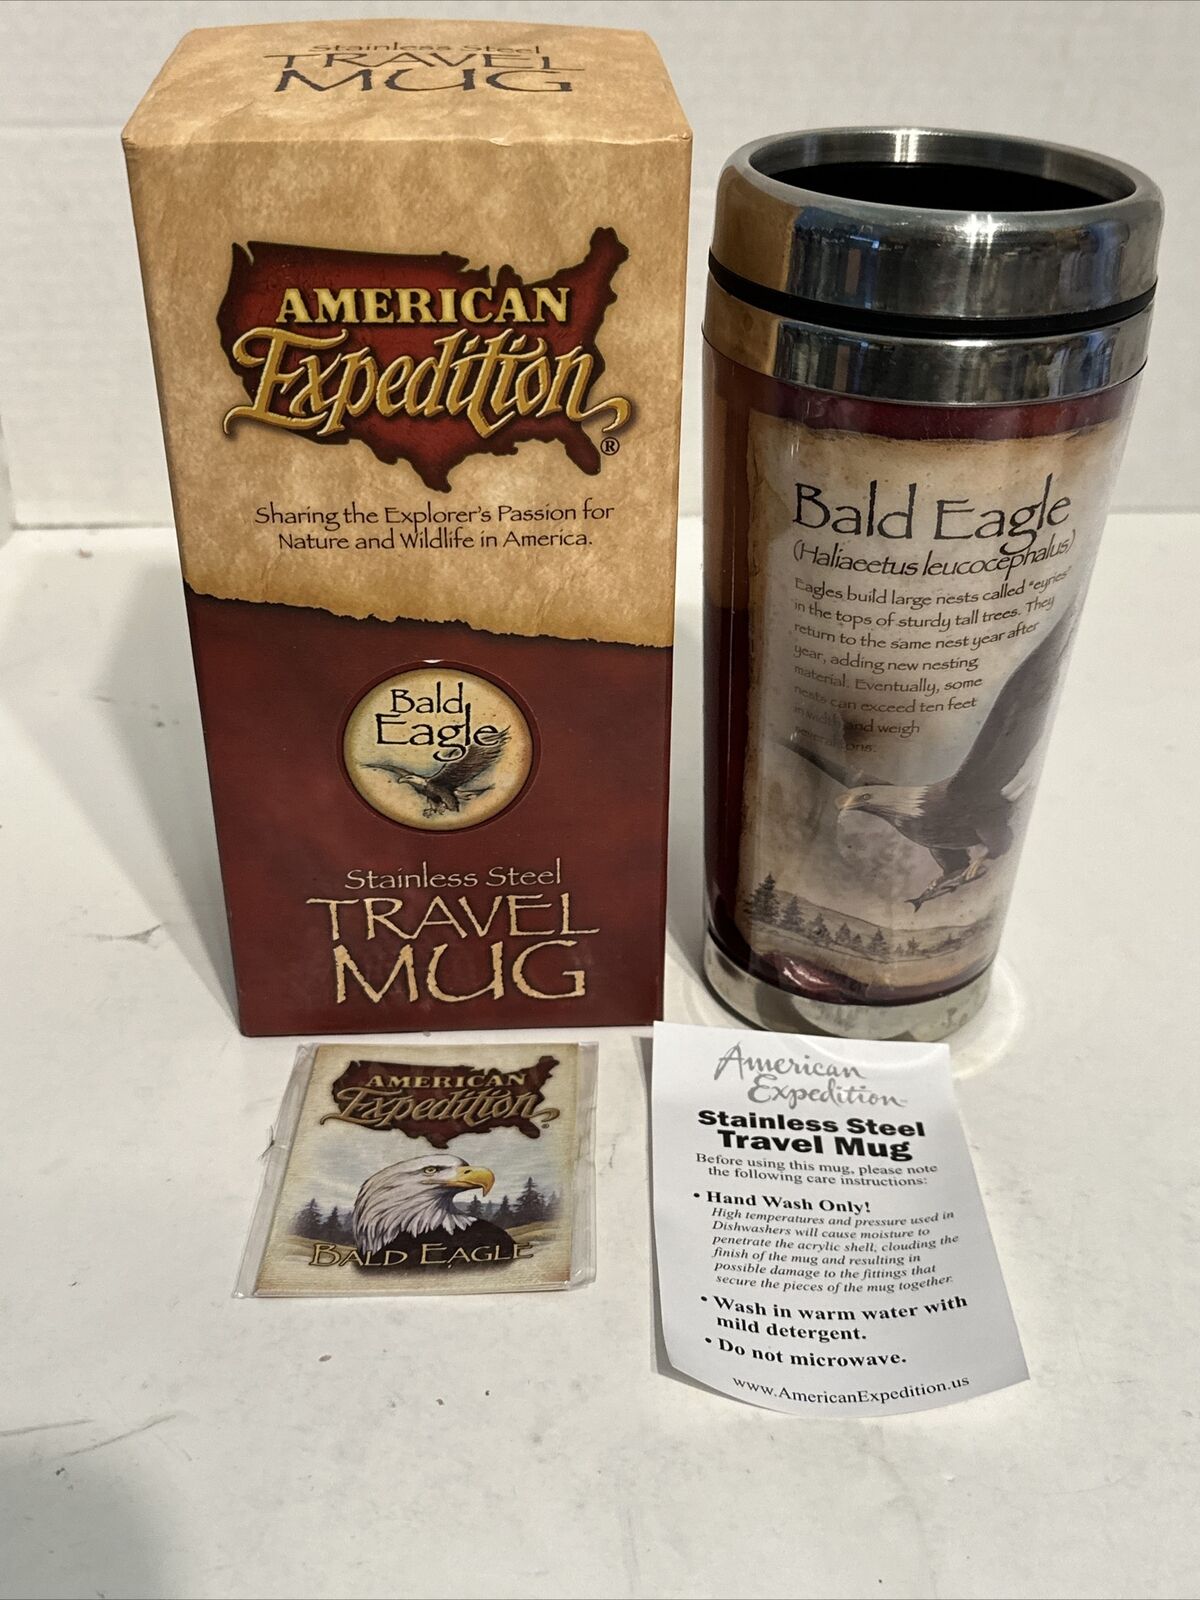 American Expedition Stainless Steel Travel Mug, Bald Eagle, MIB